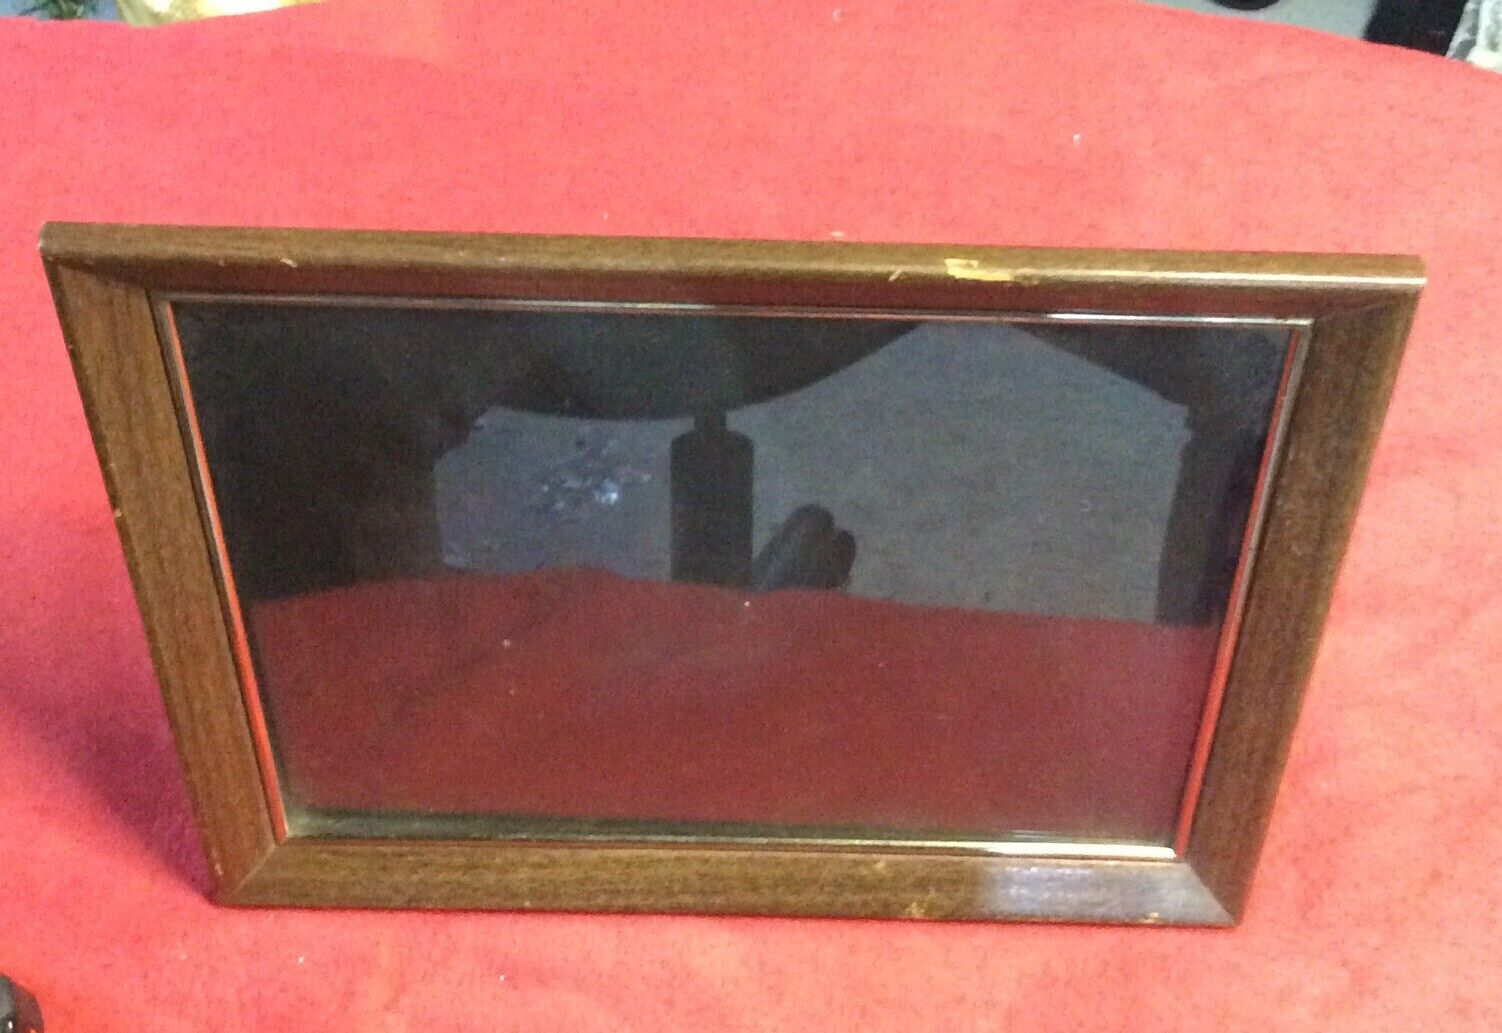 Vintage Wood Picture Frames Fits 11 X14” Frame) With Glass Brown Color.